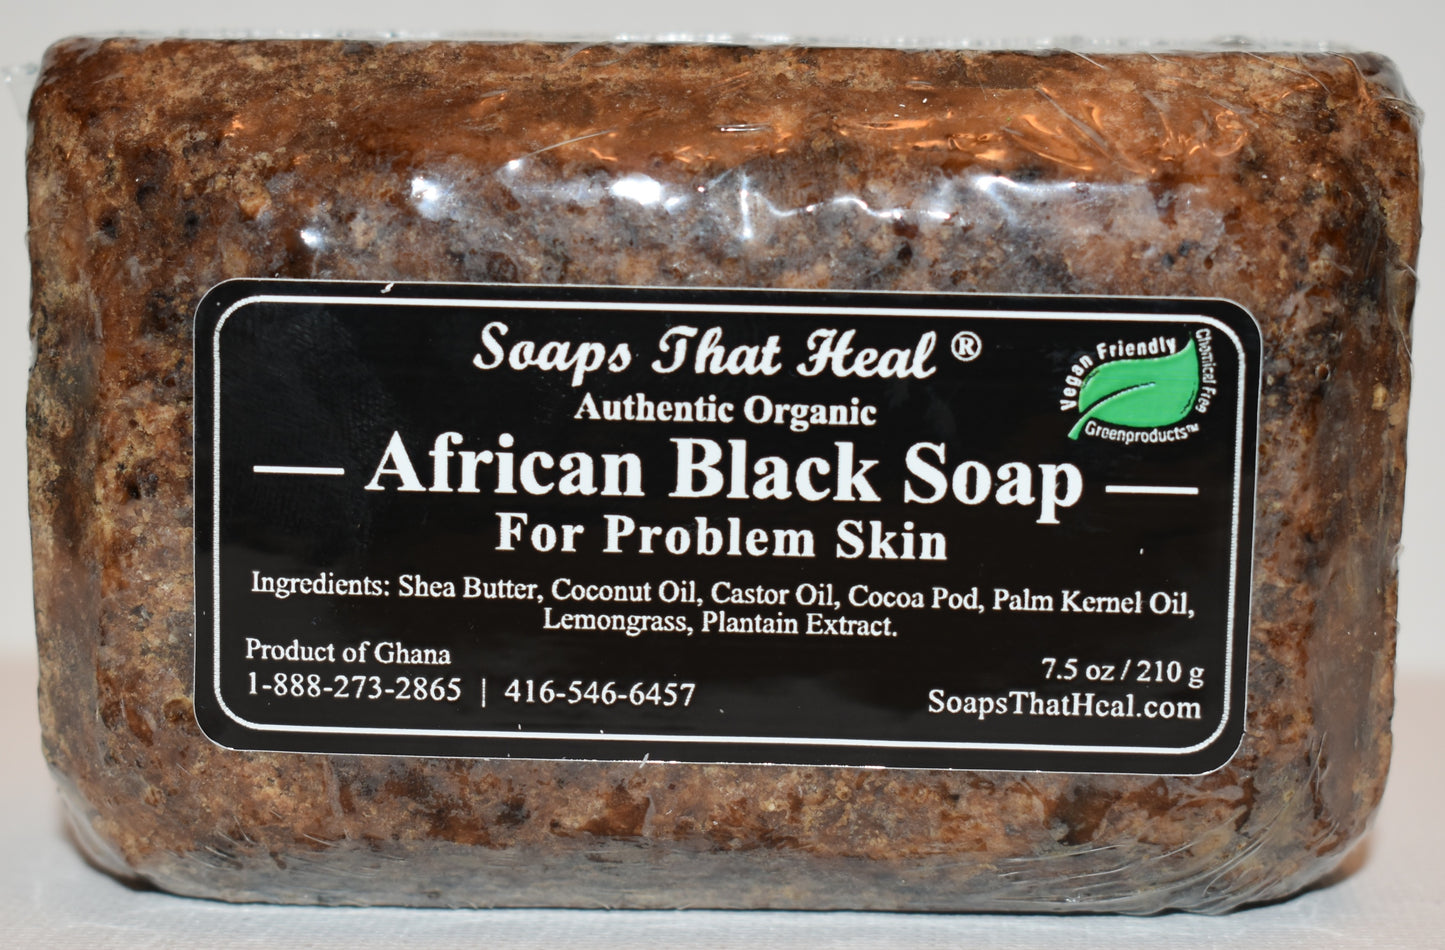 soaps that heal african black soap ghana shea butter plantain extract hyperpigmentation deep cleansing plantain extract,african black soap to remove dark marks, black soap for hyperpigmentation,african black soap benefits,how to use african black soap,raw black soap,black soap for face,acne afrian black soap,